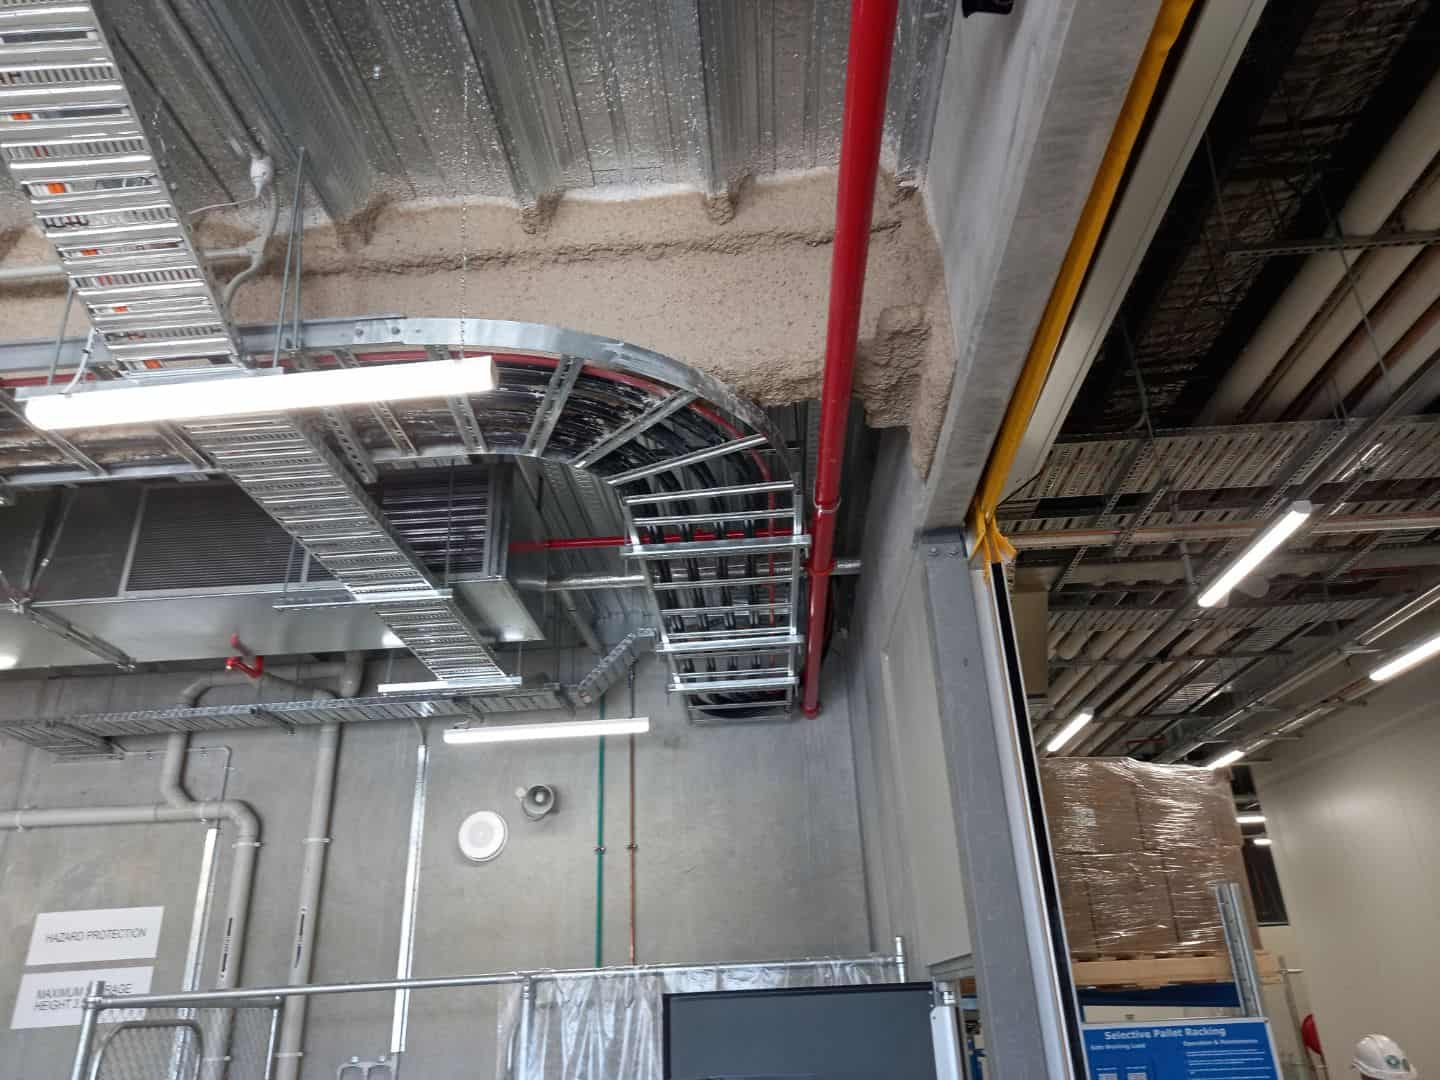 Fireproof insulation material on ducts and pipework in building